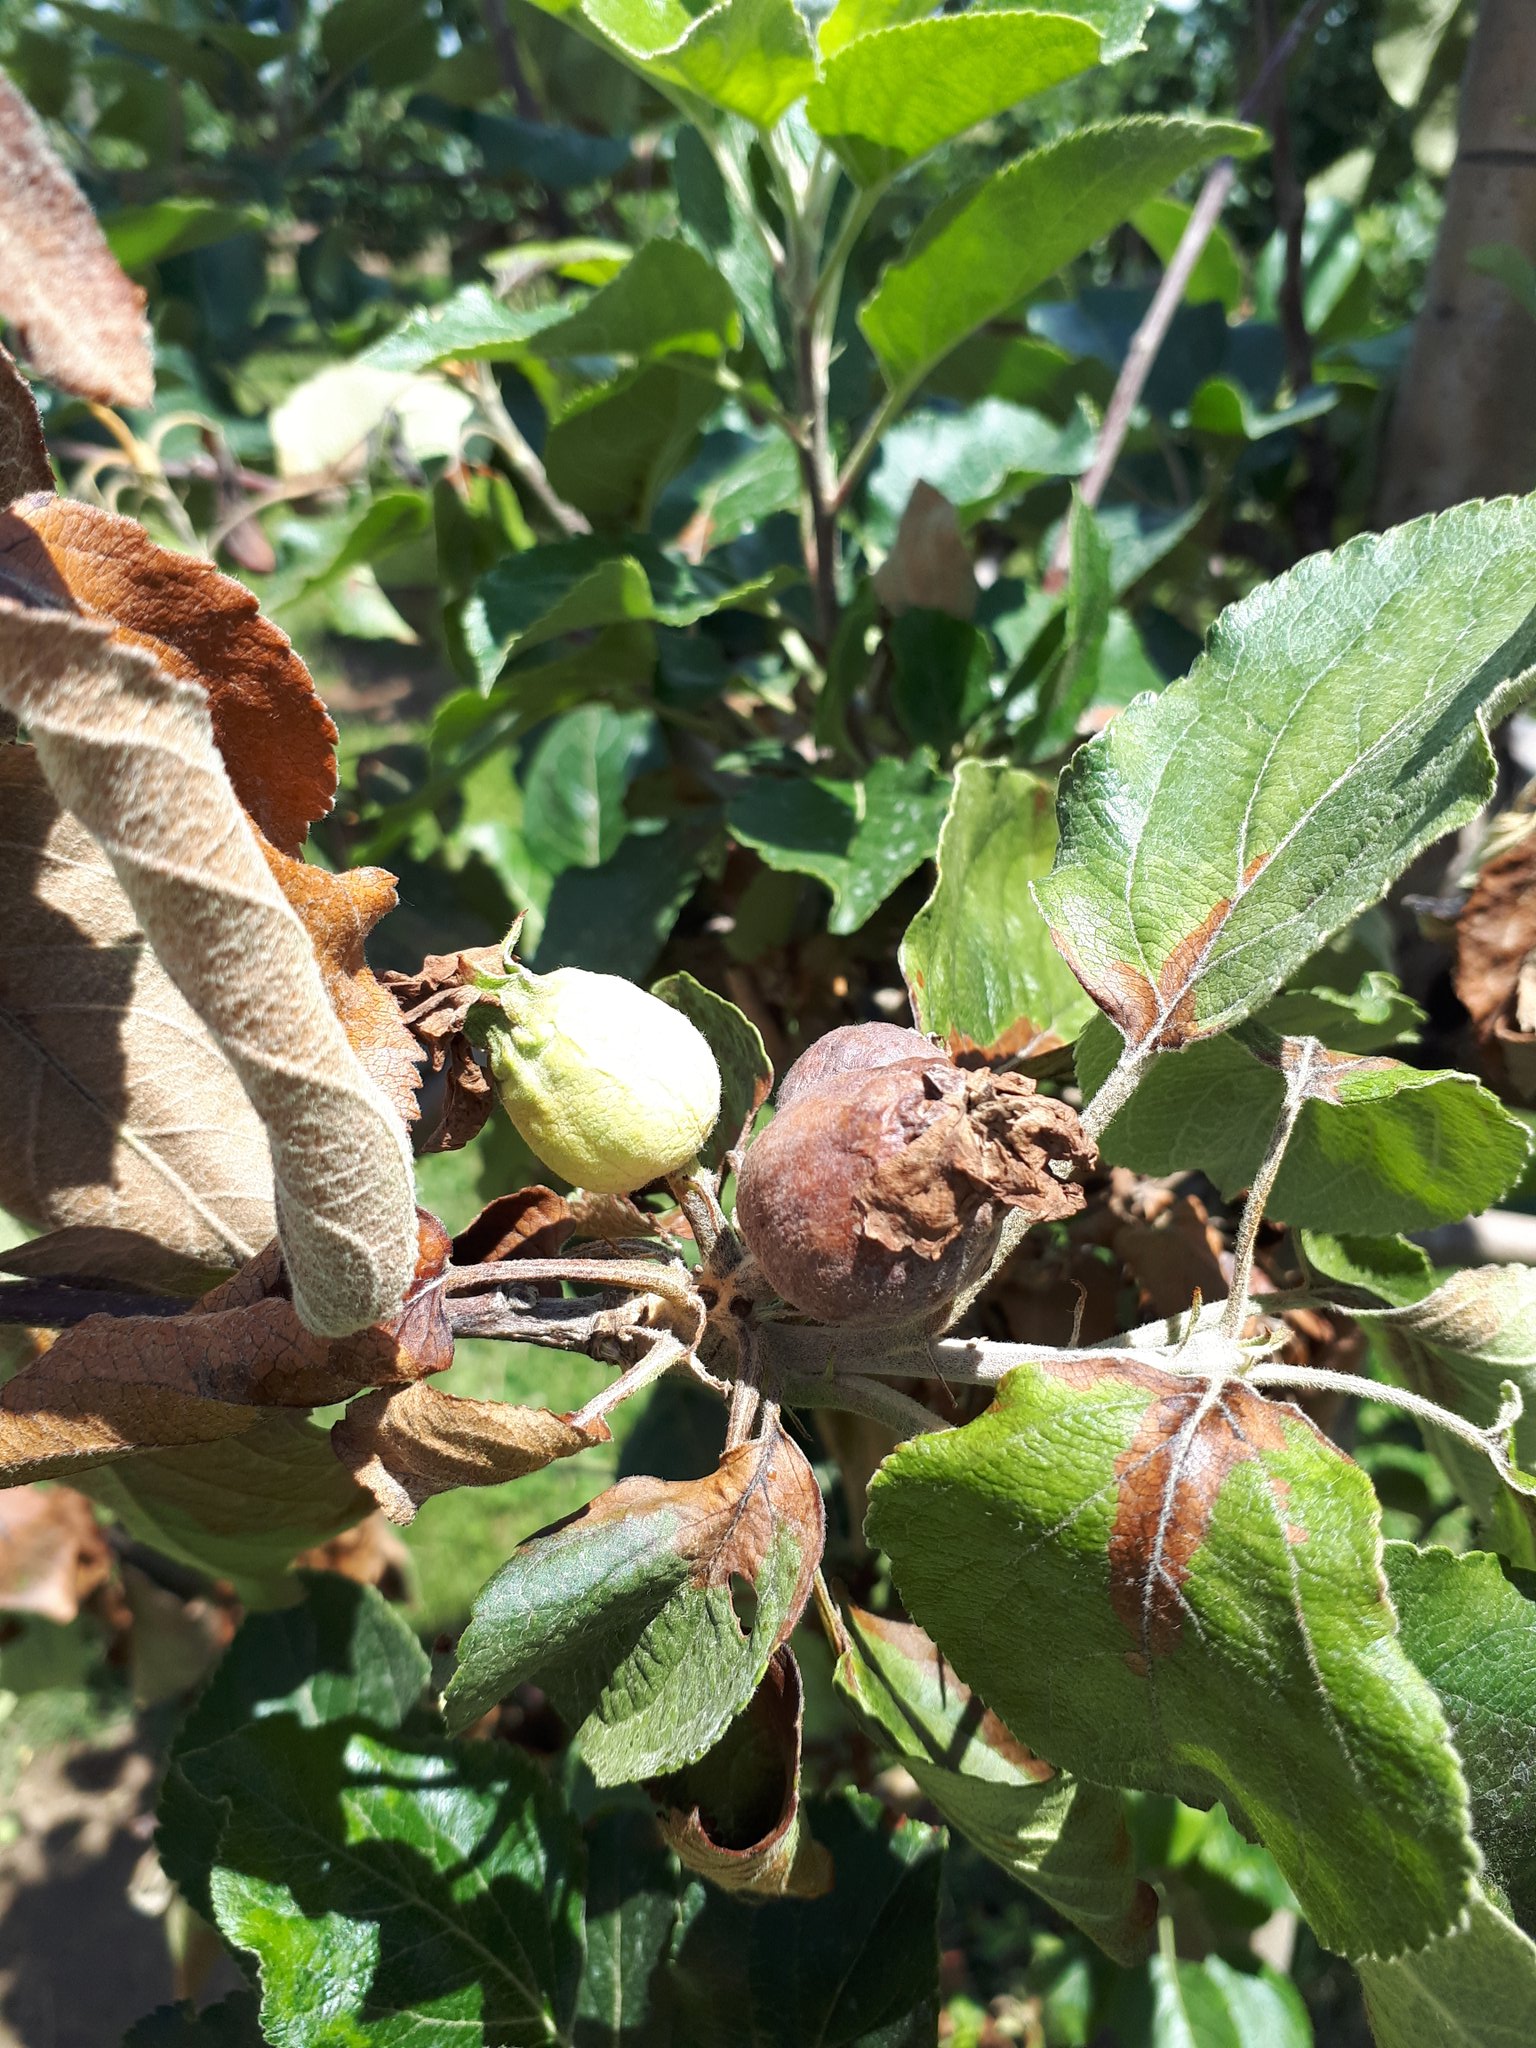 John Cline on Twitter: "We are observing severe fire blight infections in  our cider orchards this week. Some cultivars stand out: Medaile d'Or,  Yarlington Mill, Chisel Jersey, Tolman Sweet, Golden Russet, Frequin